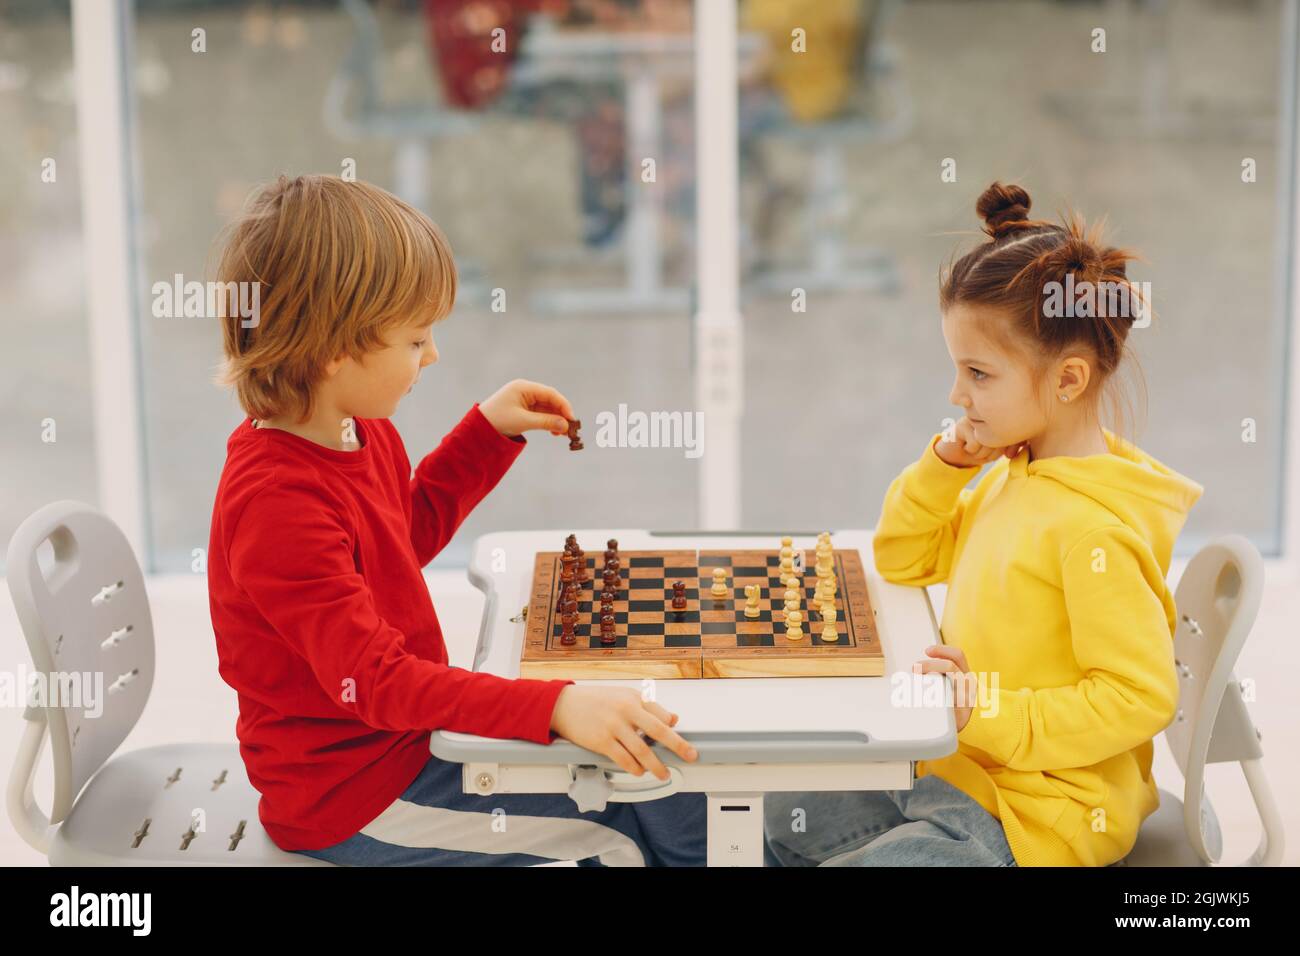 Little kids playing chess at kindergarten or elementary school. Children's chess play Stock Photo